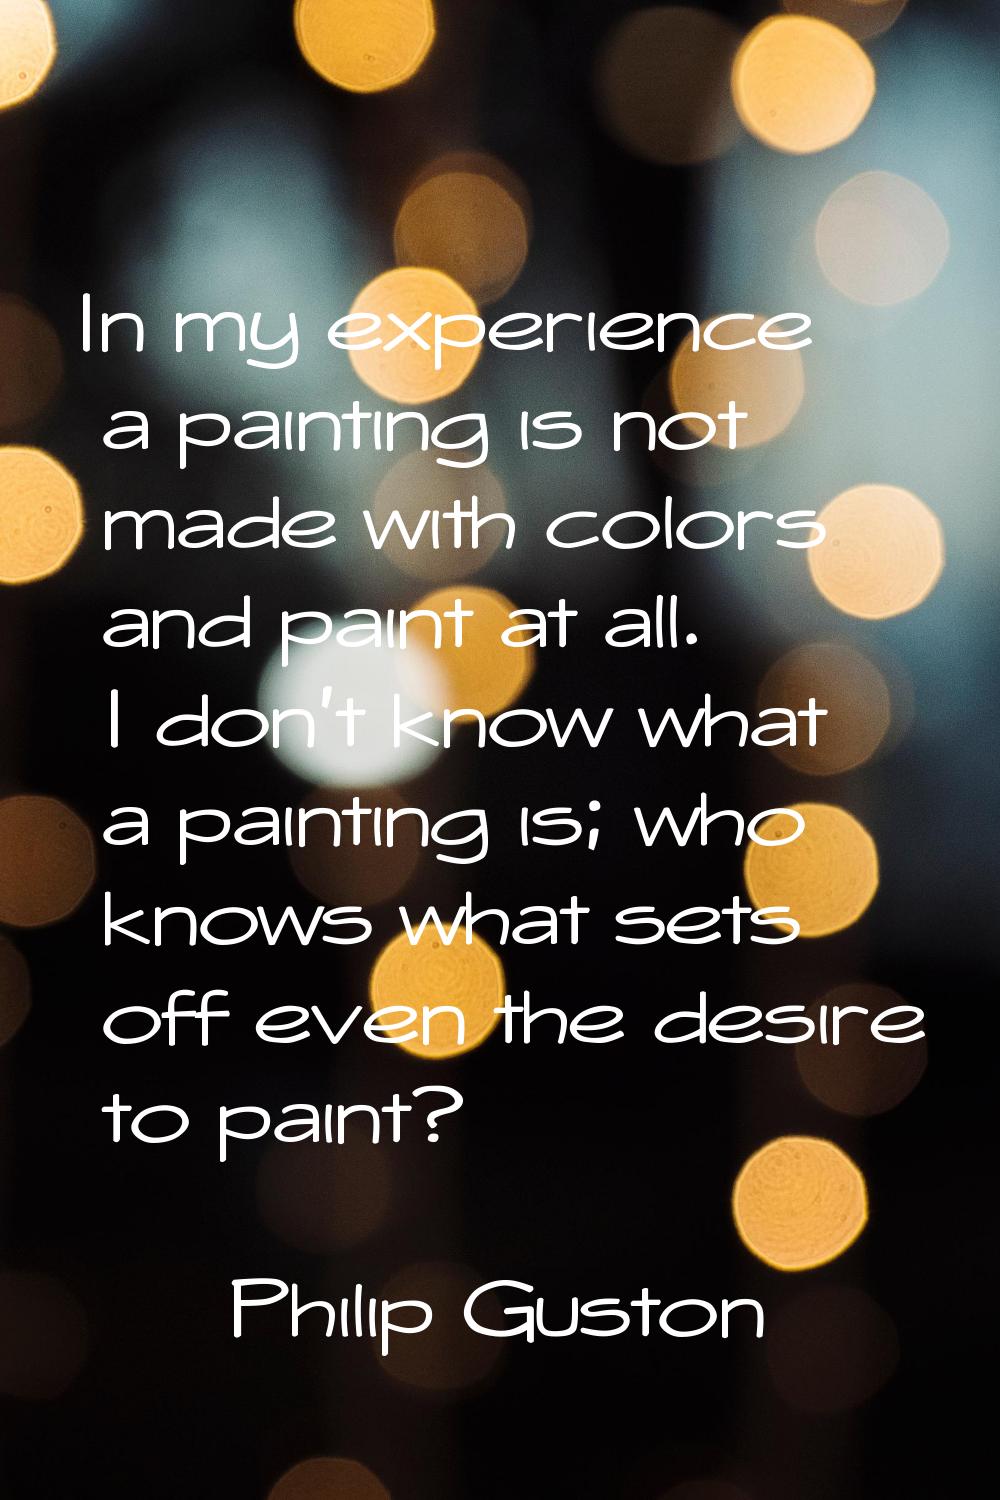 In my experience a painting is not made with colors and paint at all. I don't know what a painting 